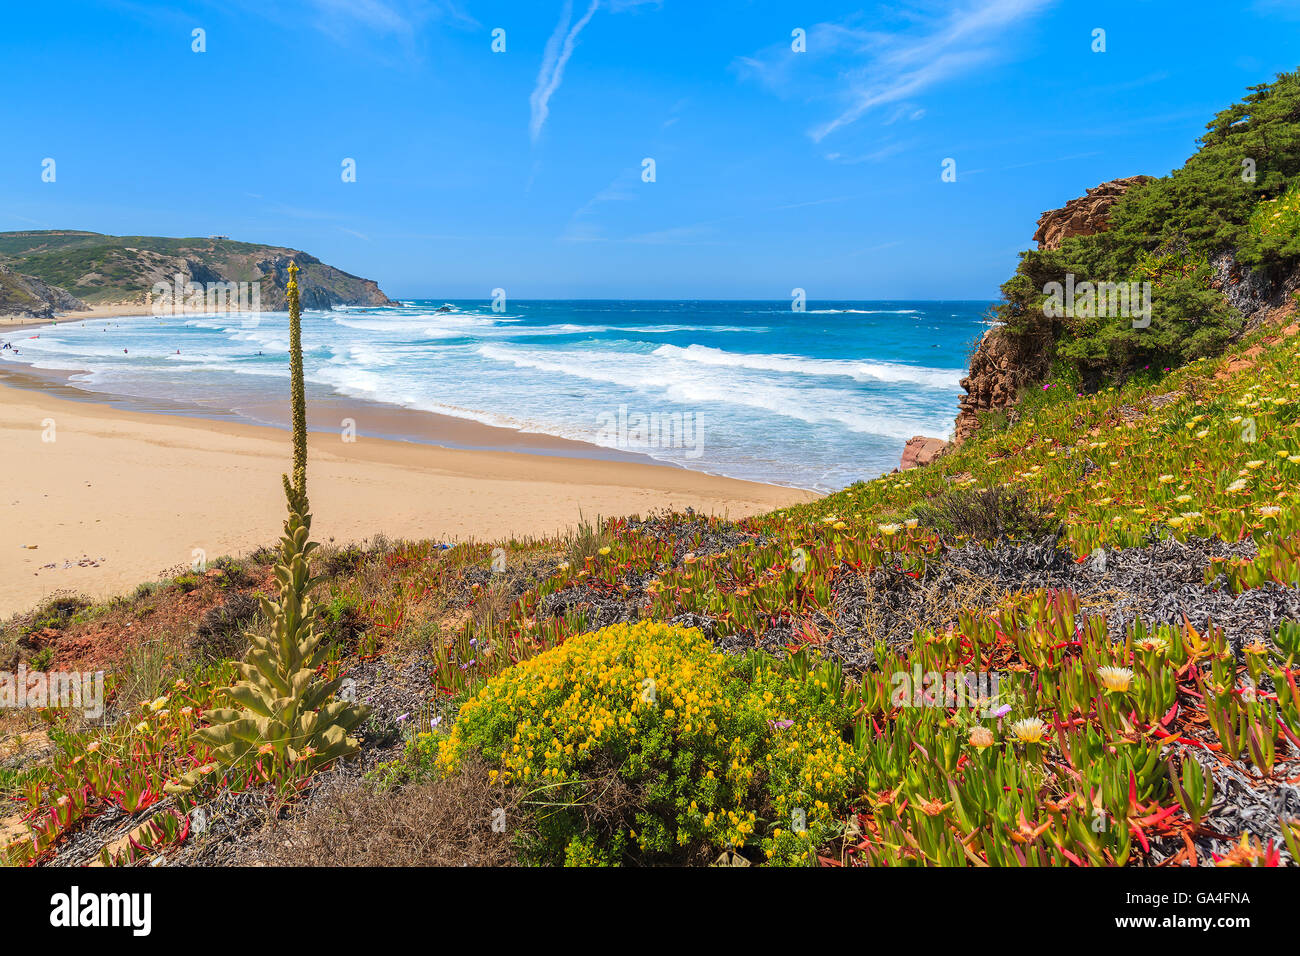 Spring flowers on Praia do Amado beach, famous place for surfing, Algarve region, Portugal Stock Photo